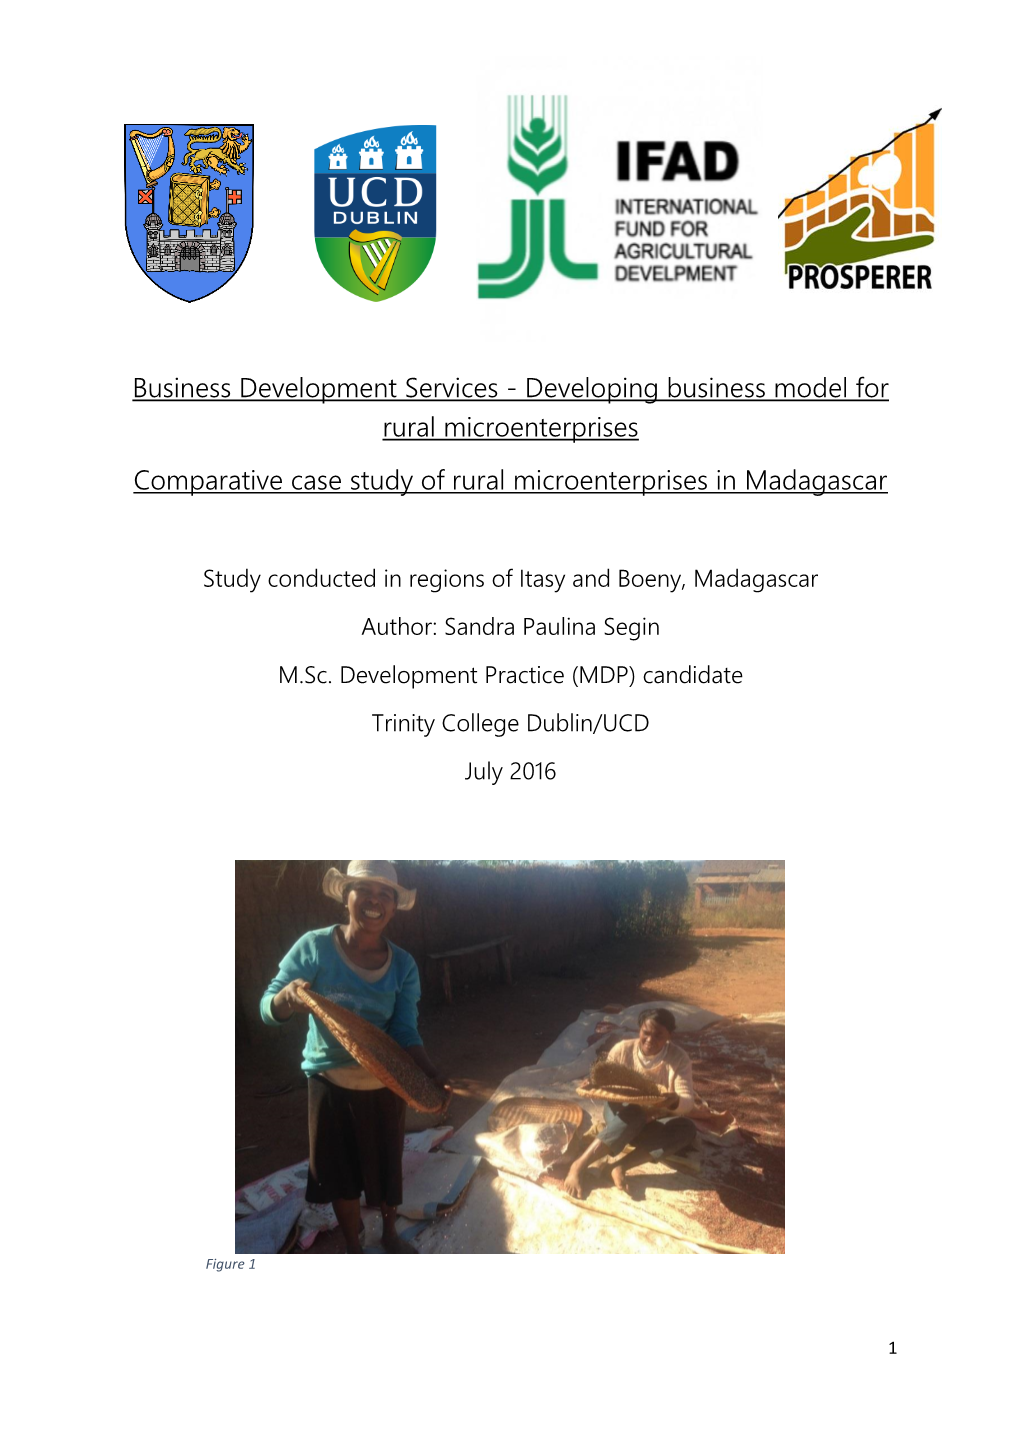 Business Development Services - Developing Business Model for Rural Microenterprises Comparative Case Study of Rural Microenterprises in Madagascar